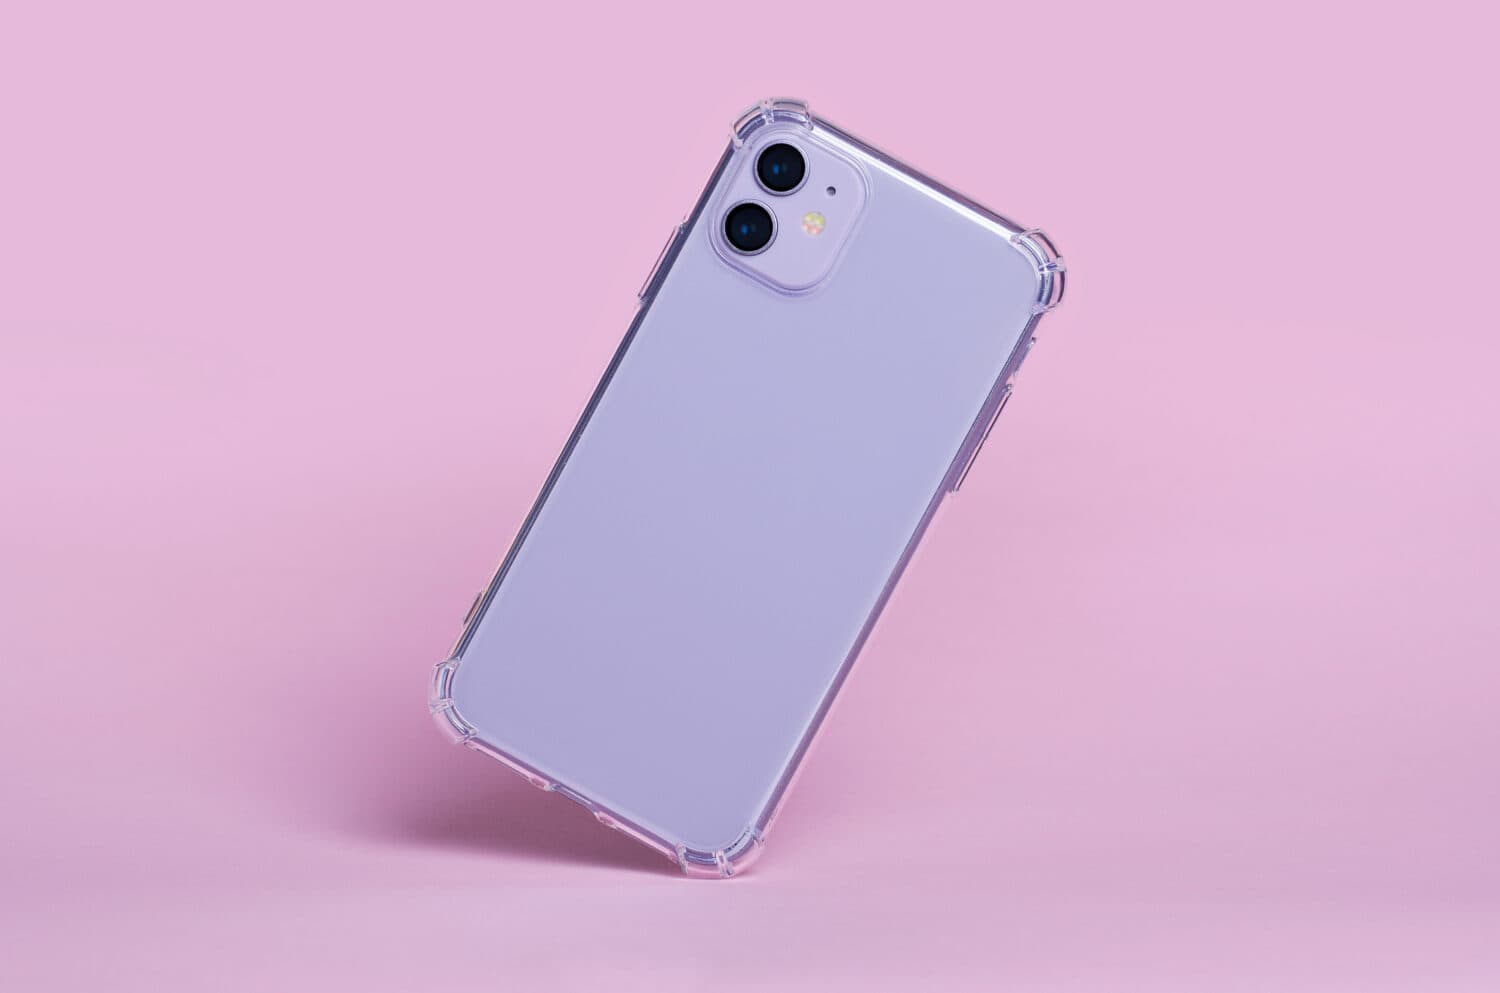 Purple iPhone 11 in clear silicone case falls down isolated on pink background. Phone case mockup back view